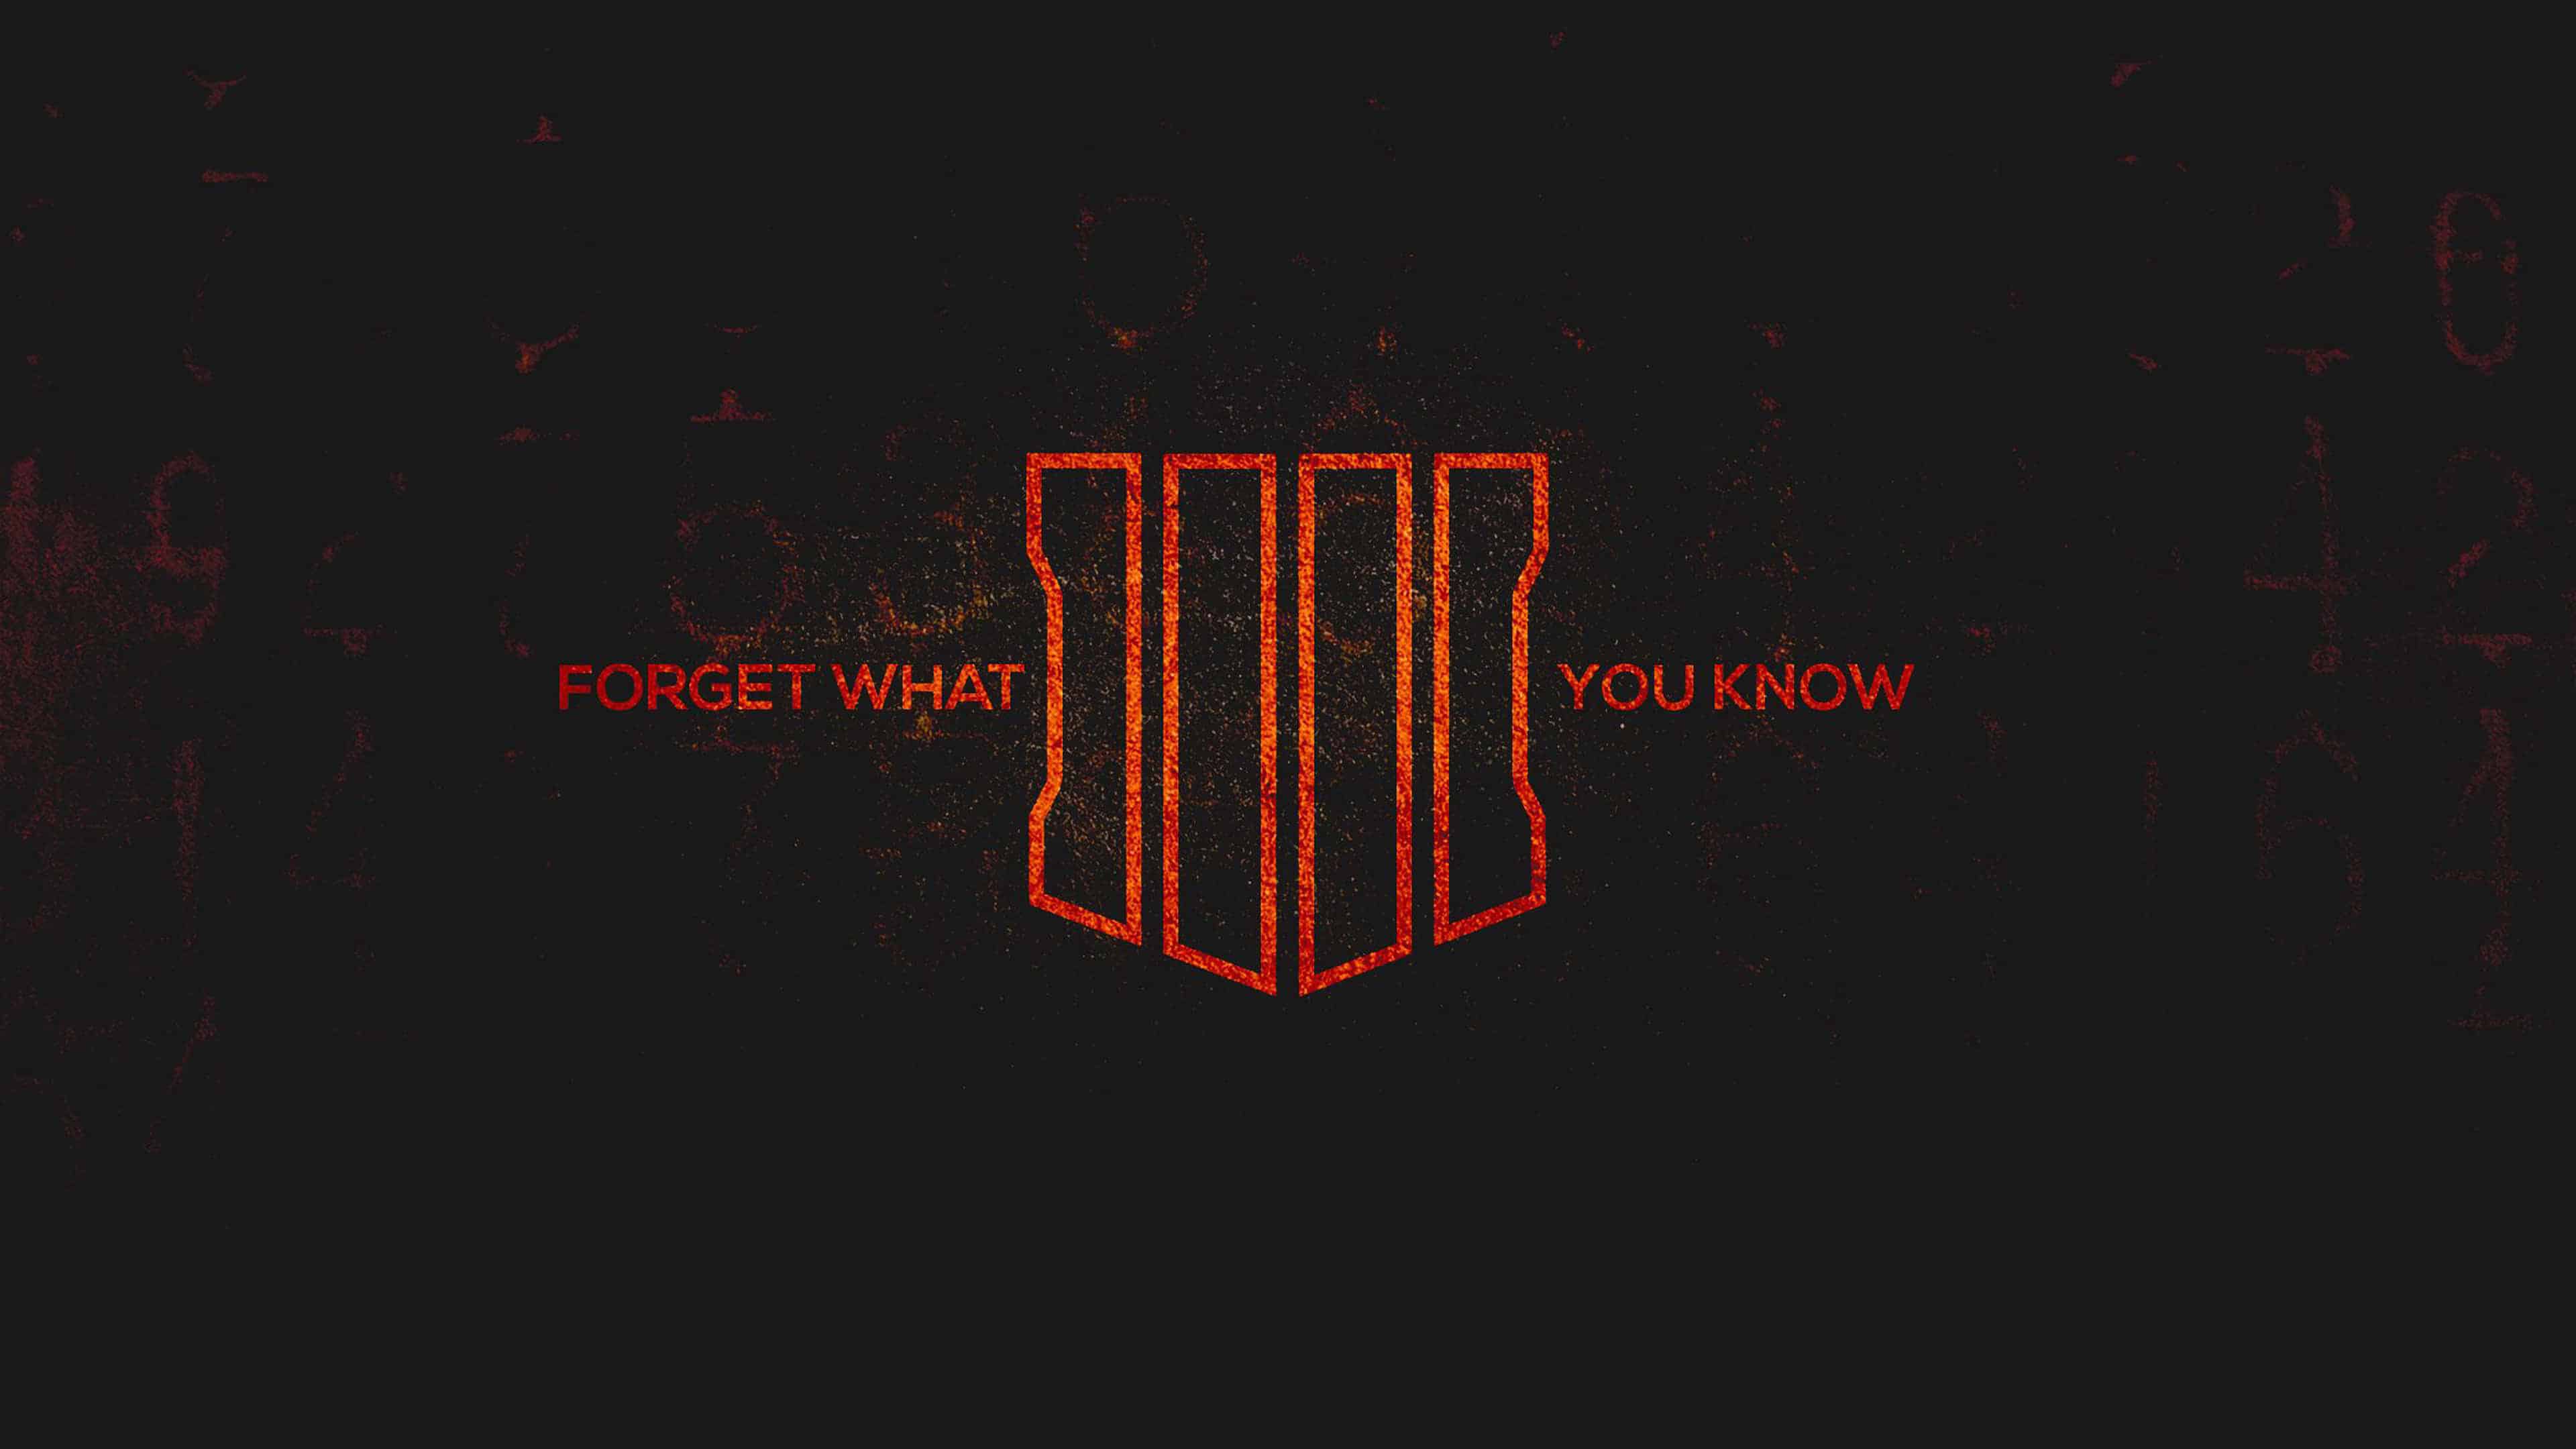 Call Of Duty Black Ops Forget What You Know UHD 4k Wallpaper